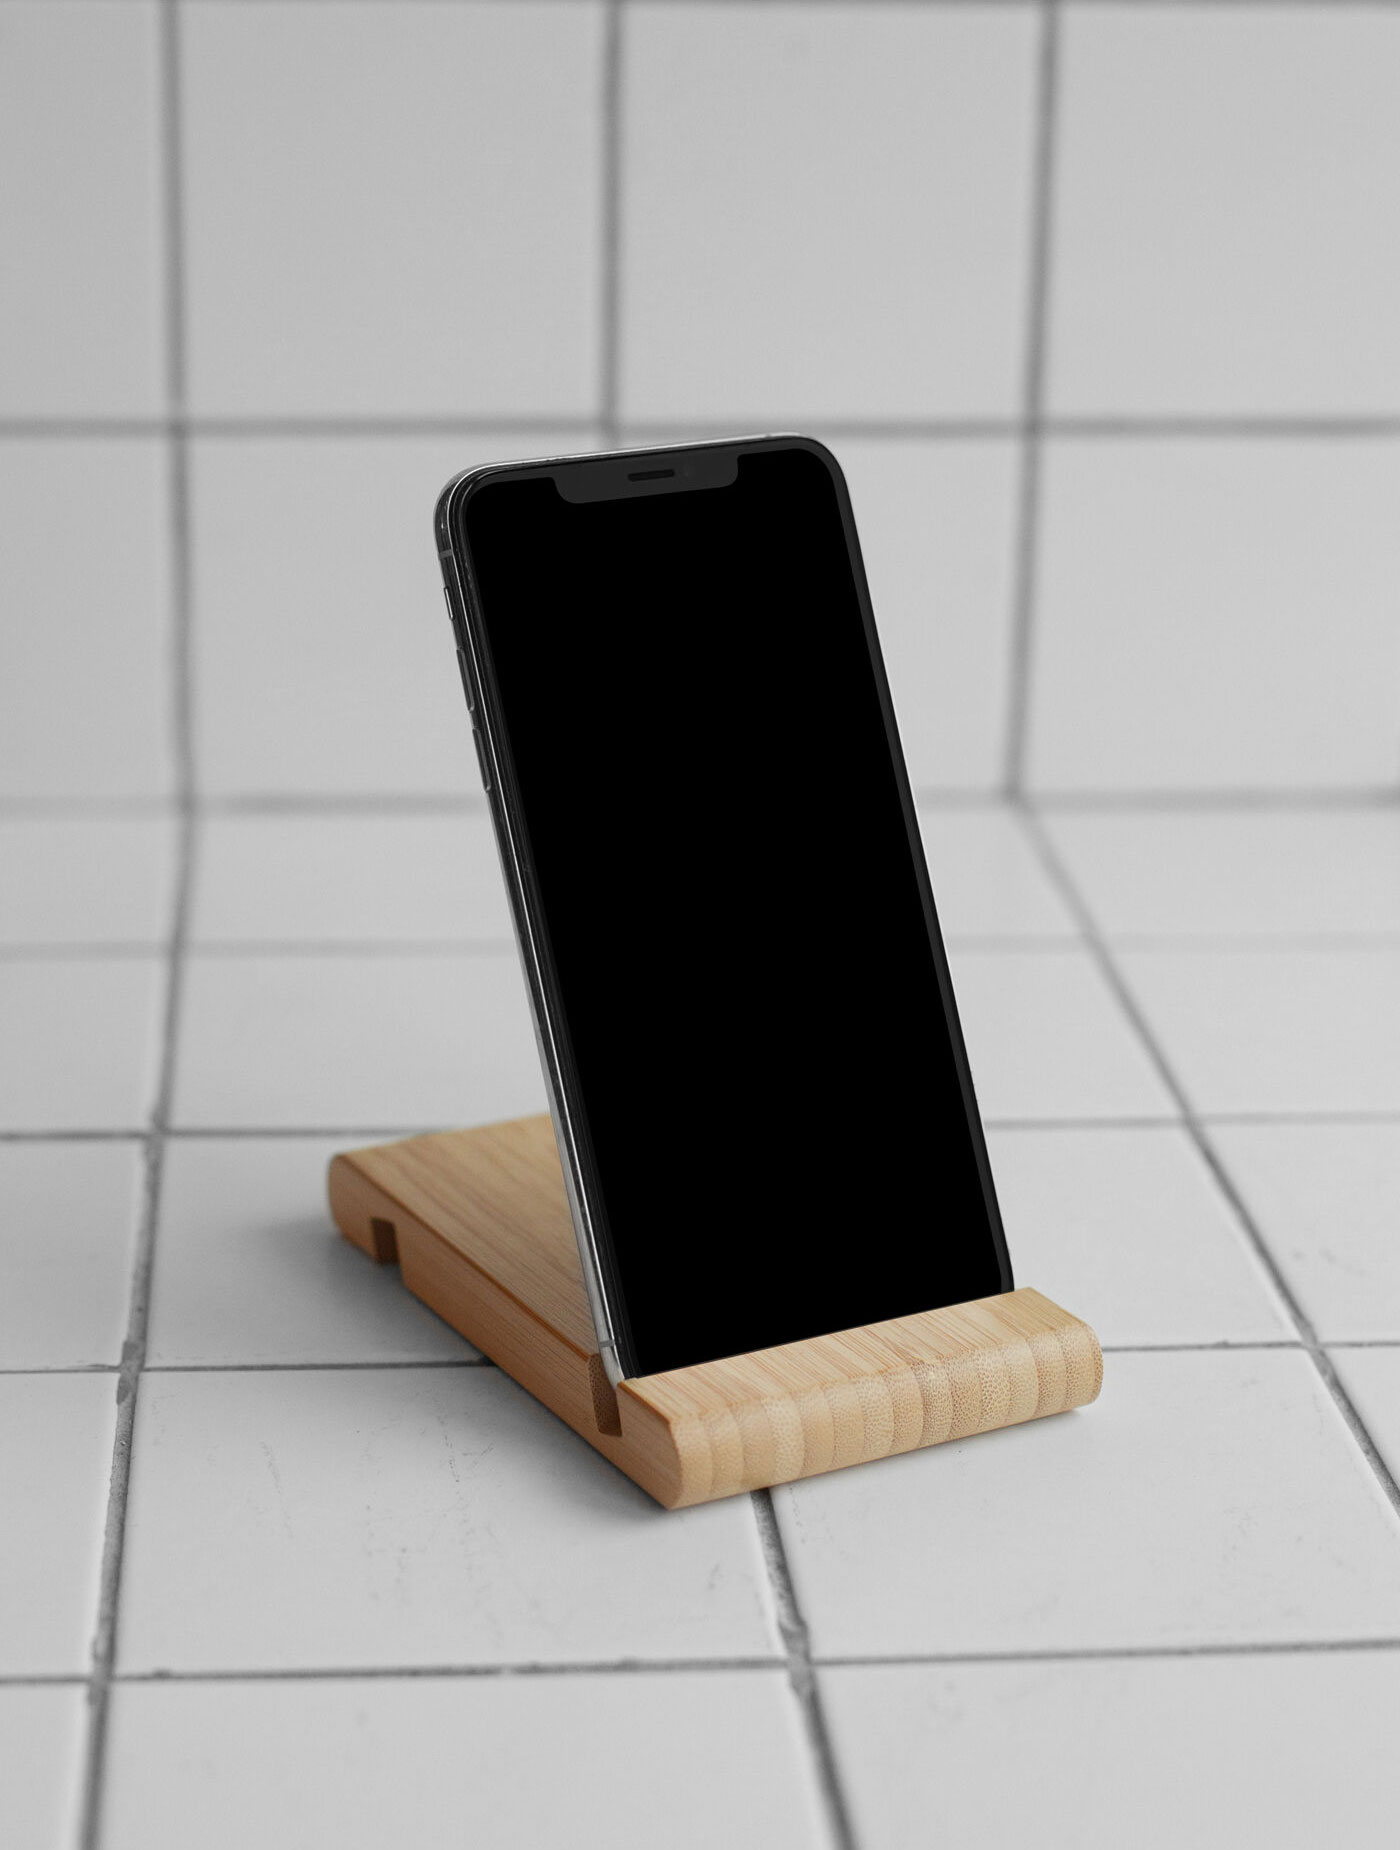 iPhone on Wooden Stand Mockup with Tiled Floor and Wall FREE PSD